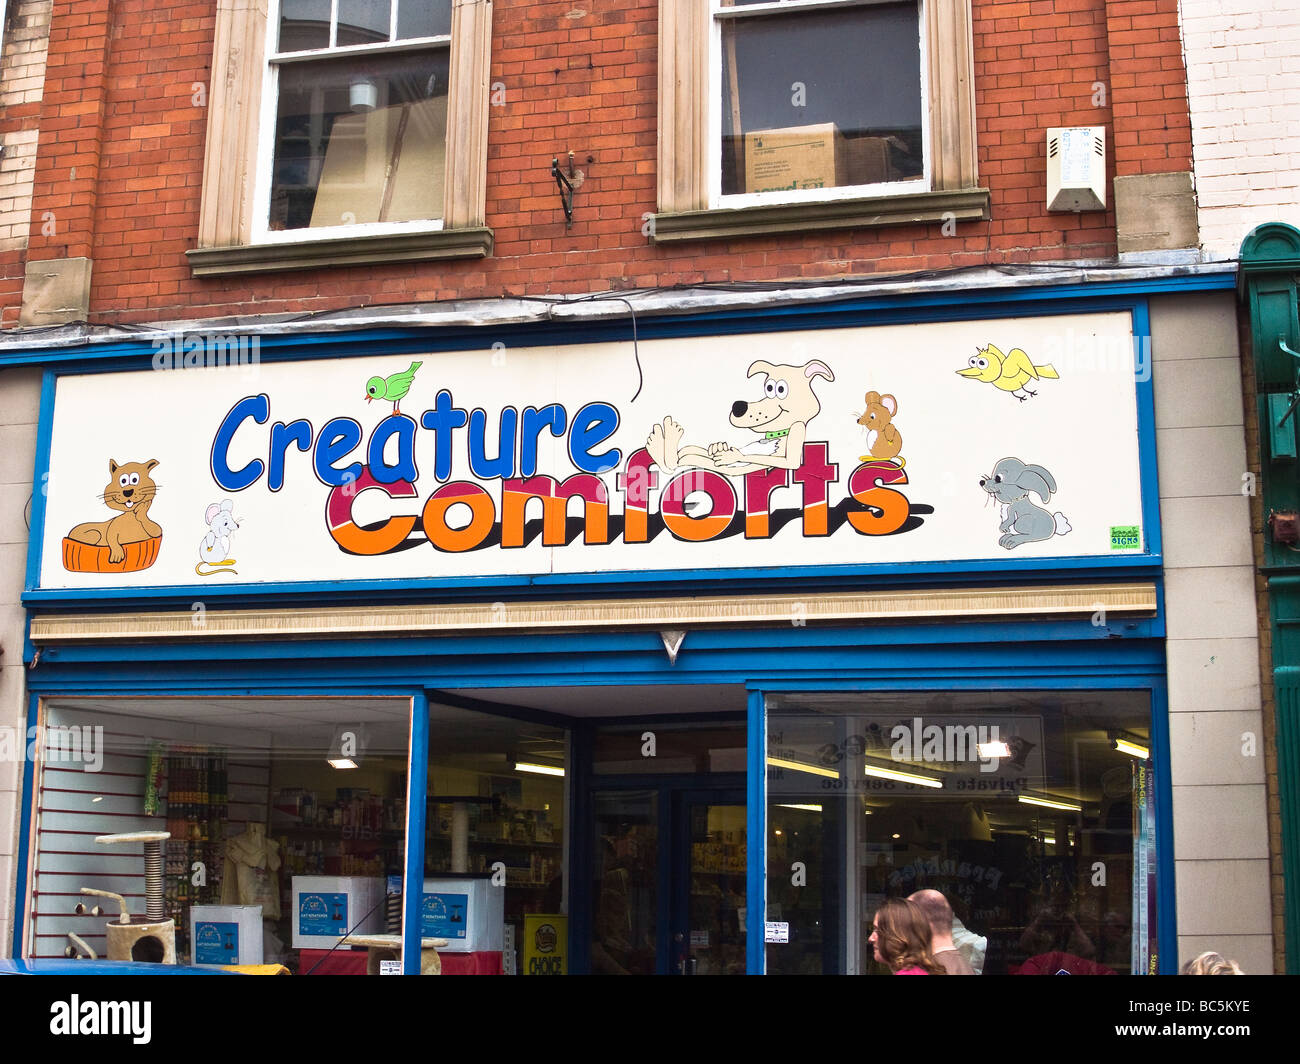 Creature Comforts name of pet shop in Tiverton Devon UK seen from public highway Stock Photo